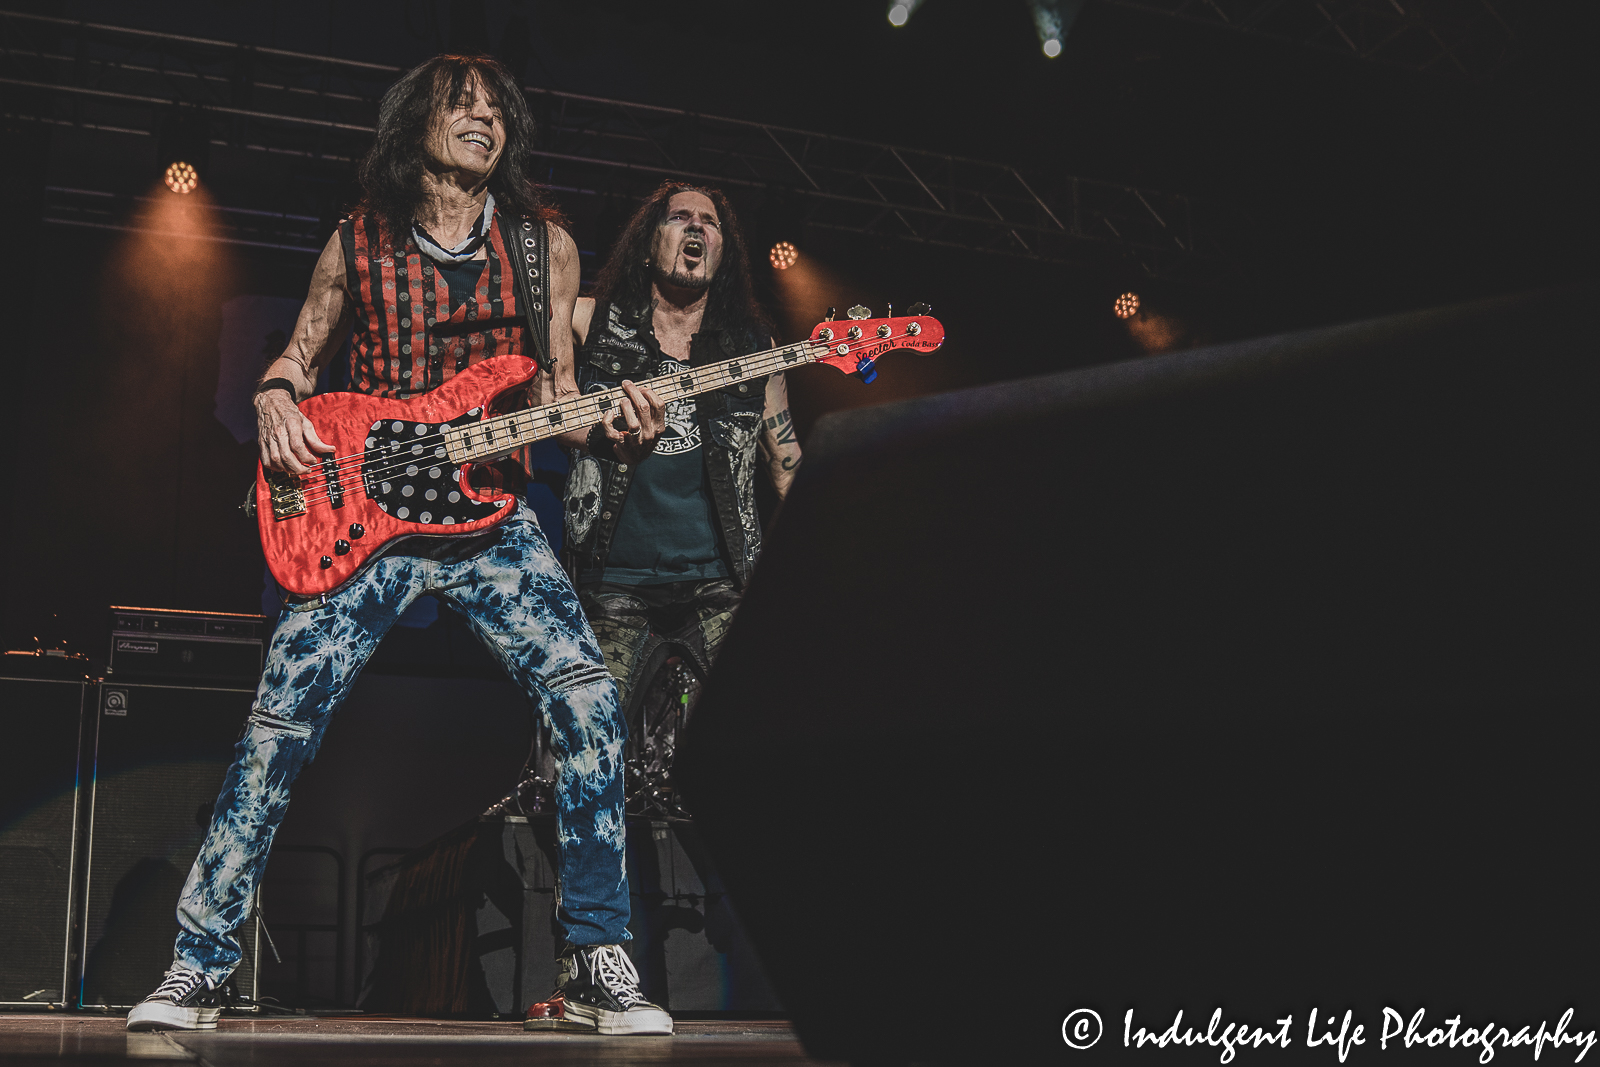 Bass guitarist Rudy Sarzo and lead vocalist Jizzy Pearl of Quiet Riot live in concert together at Ameristar Casino in Kansas City, MO on July 29, 2022.